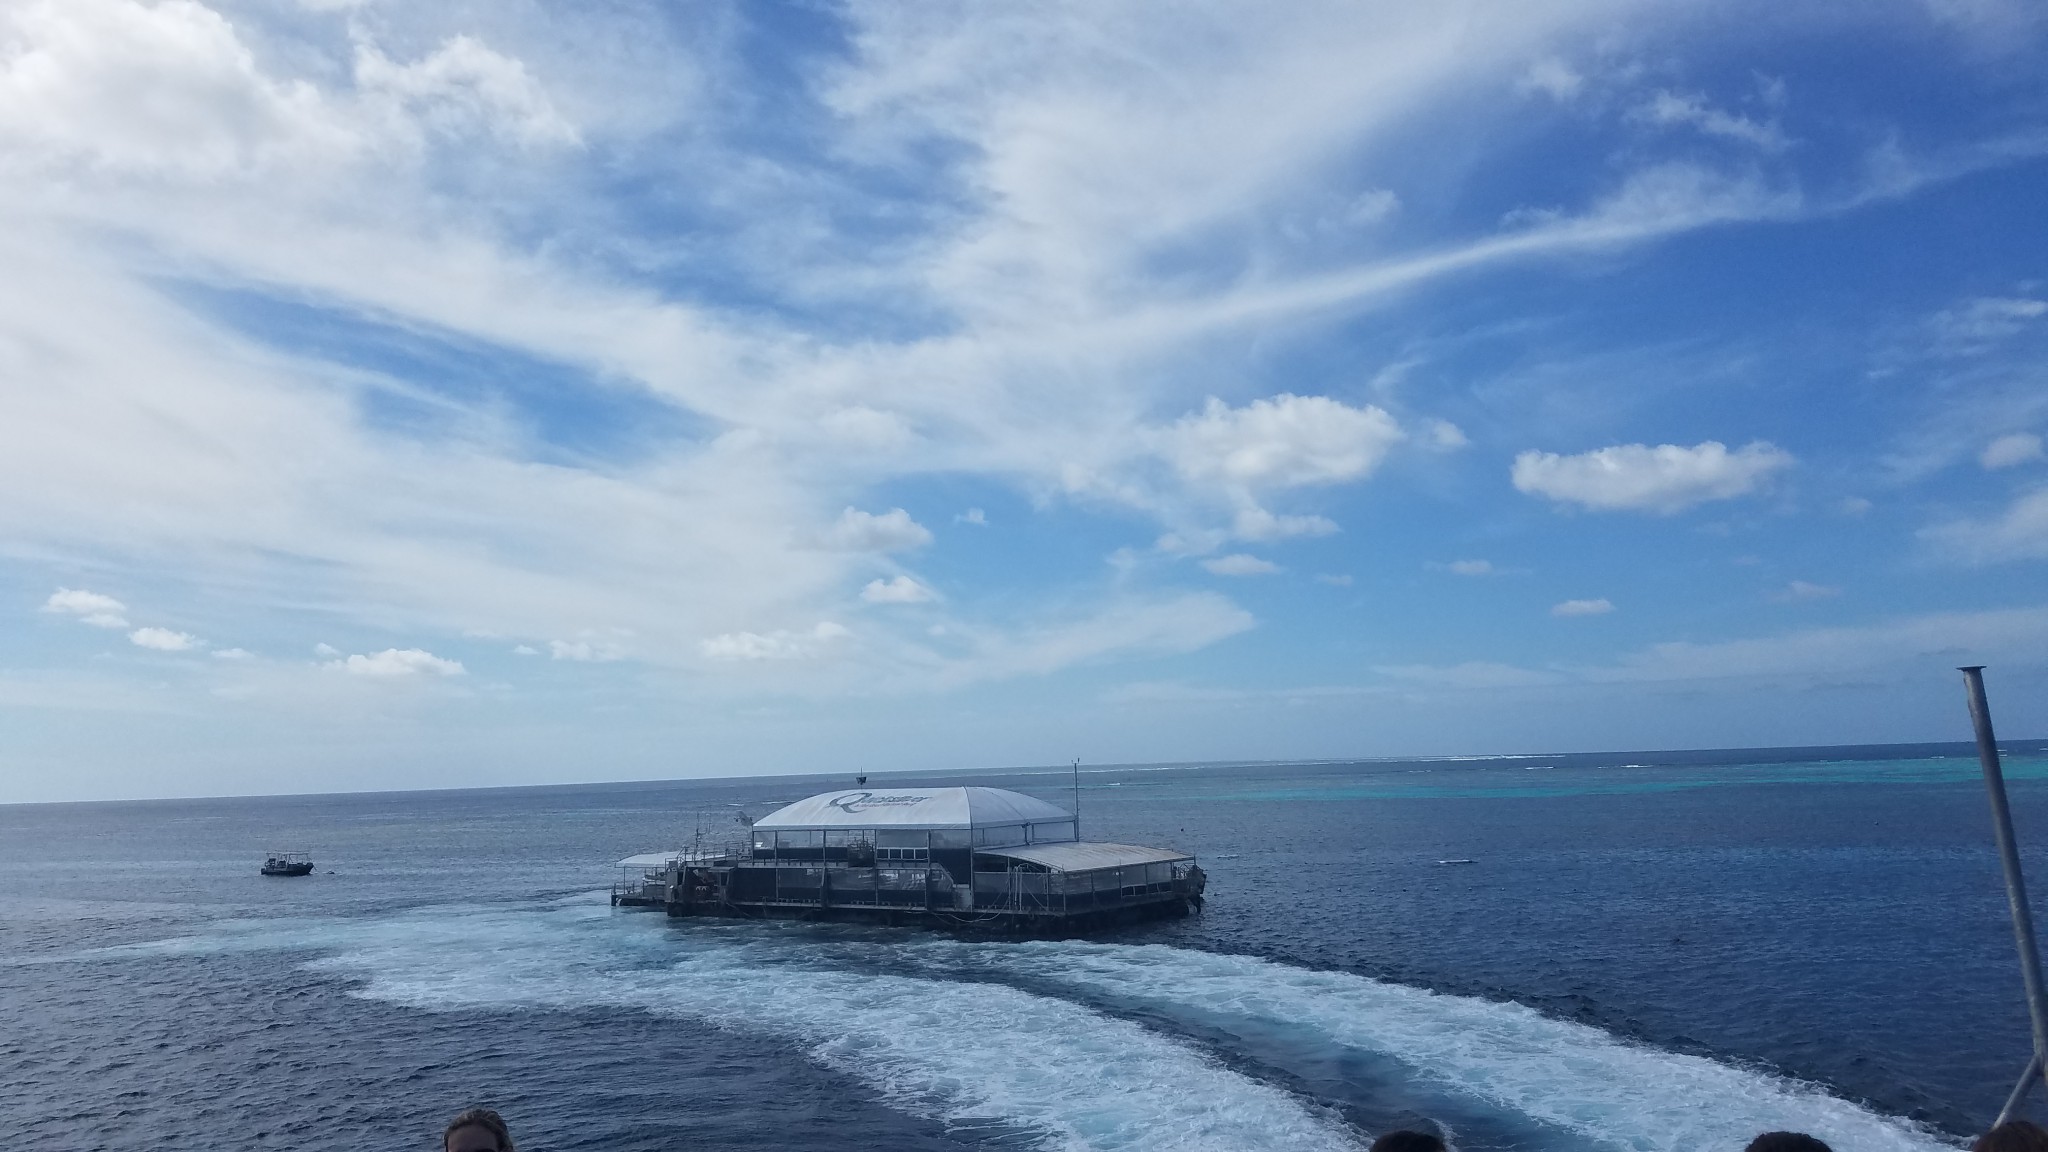 Day 2 – 9/4/17 – Wait Where Did My Day Go? – Great Barrier Reef